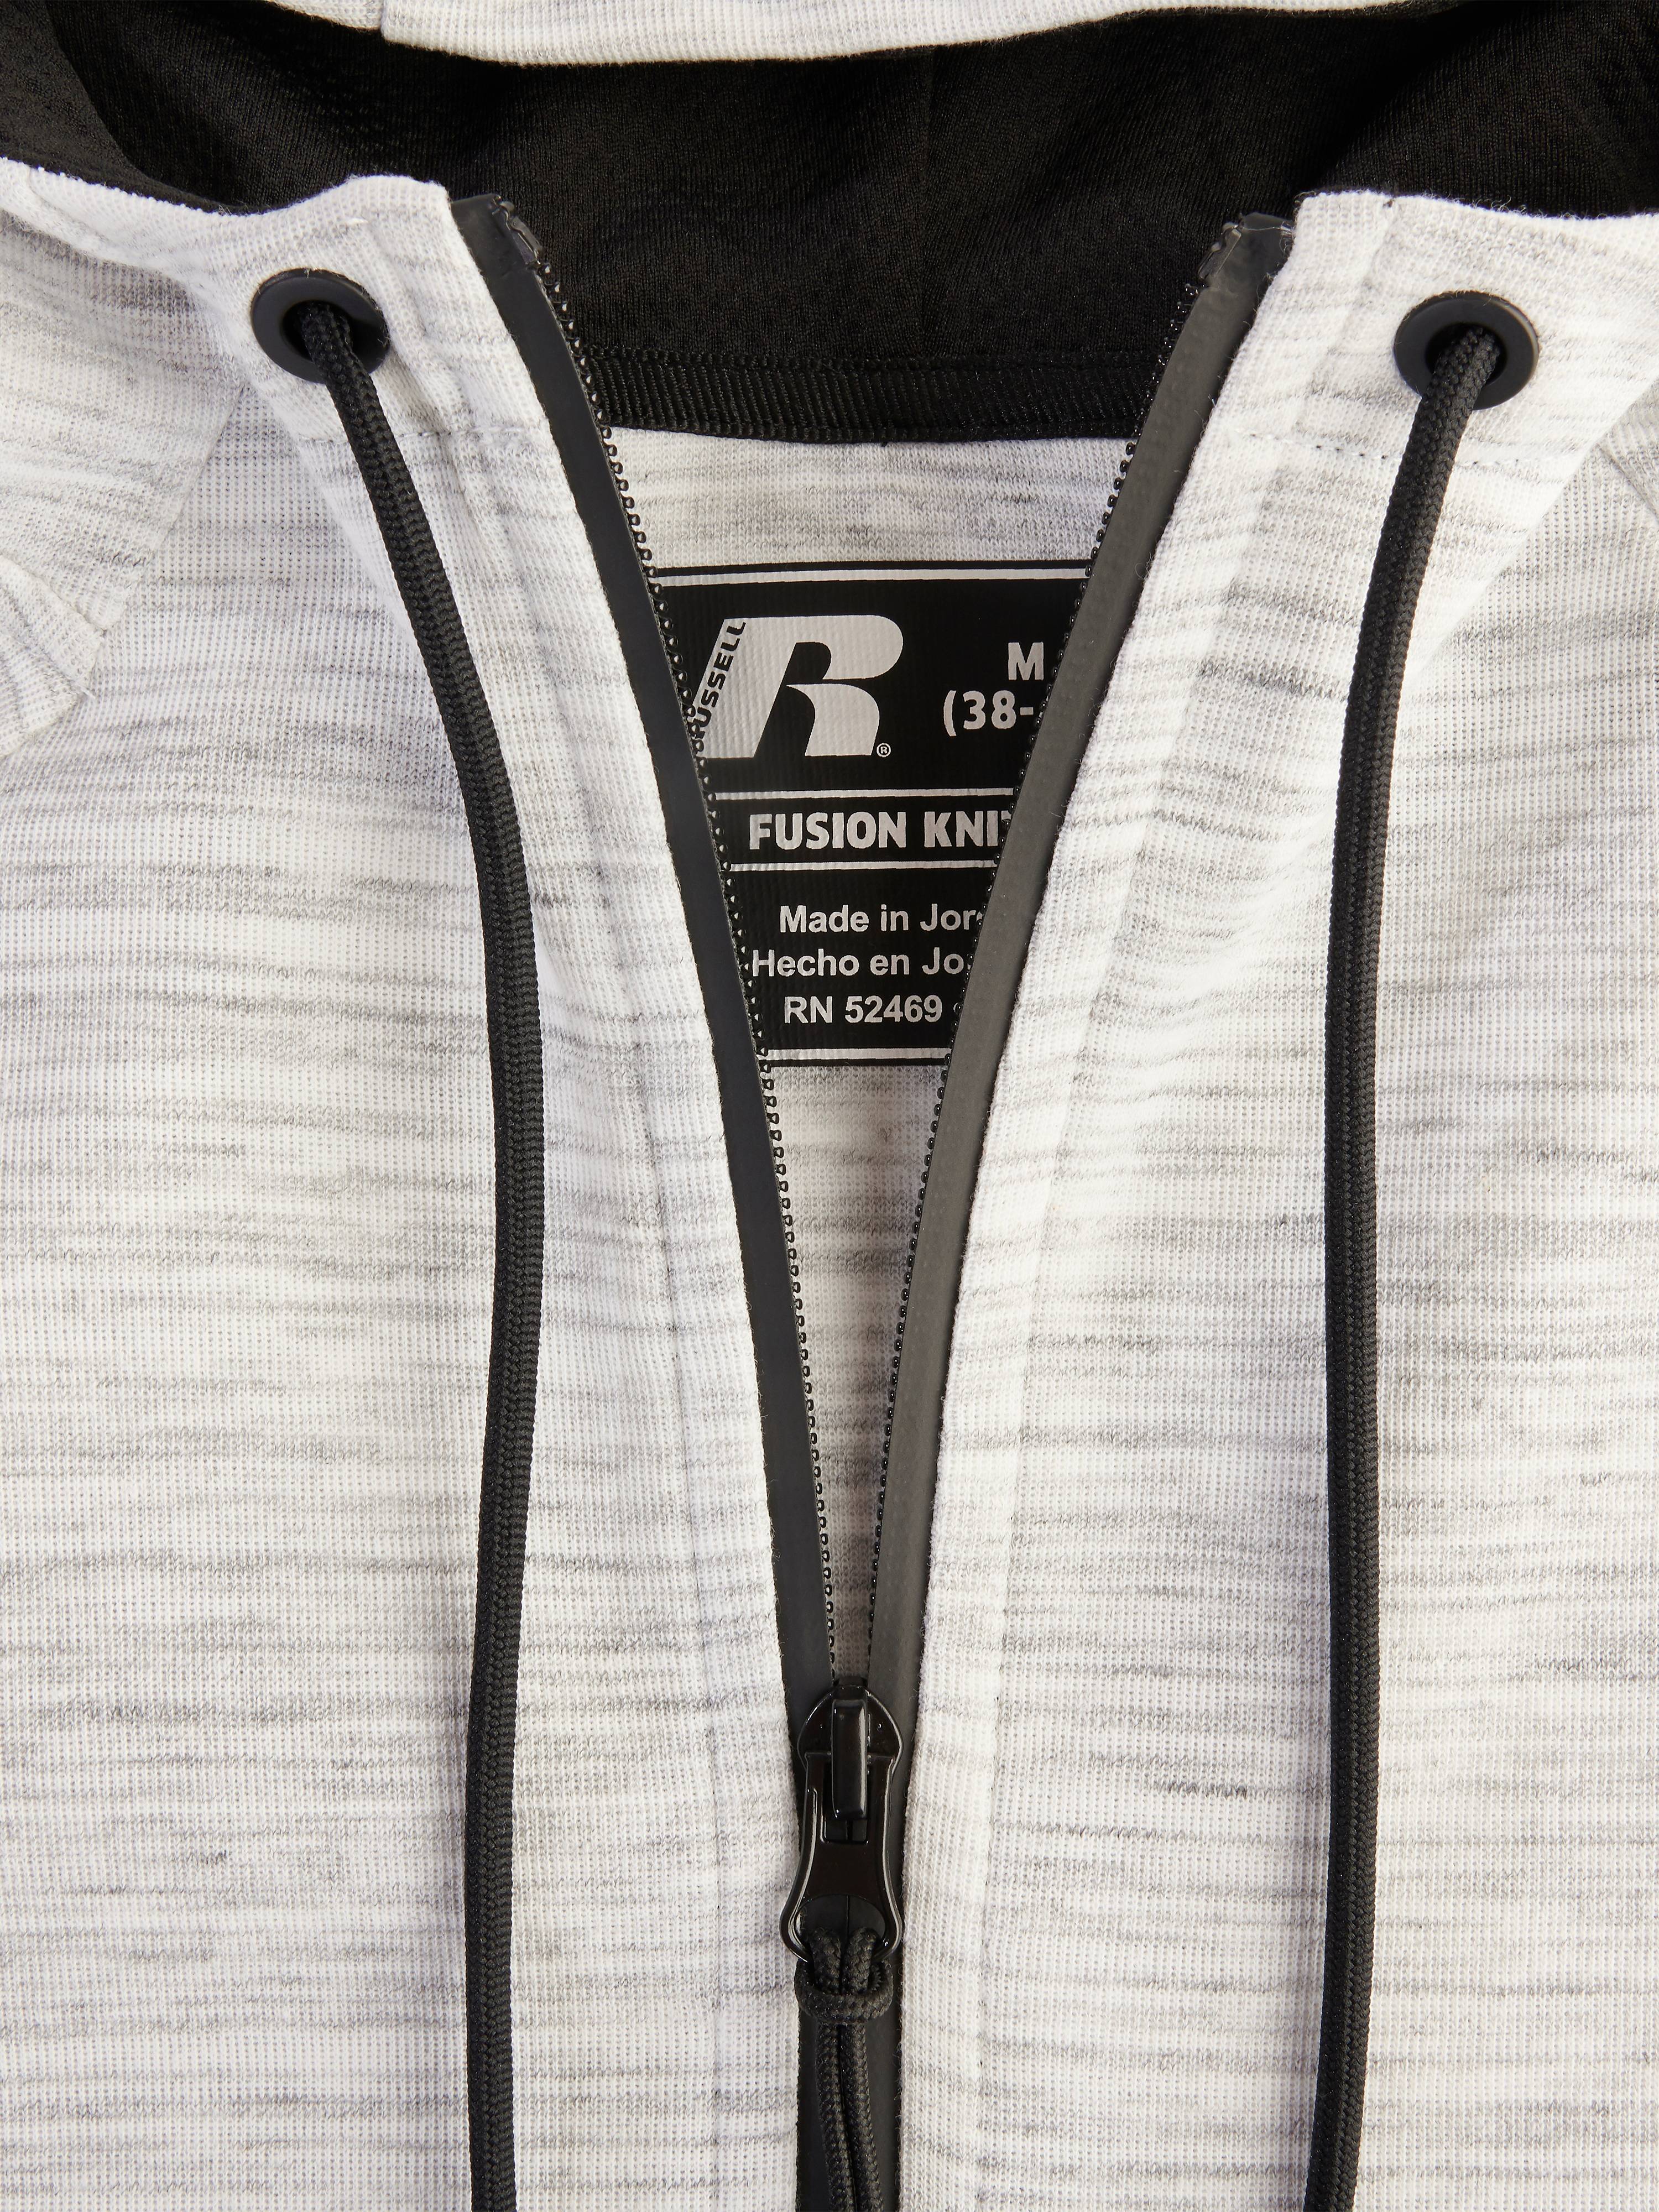 Russell Big Men's Double Knit Zip Up Jacket - image 3 of 5